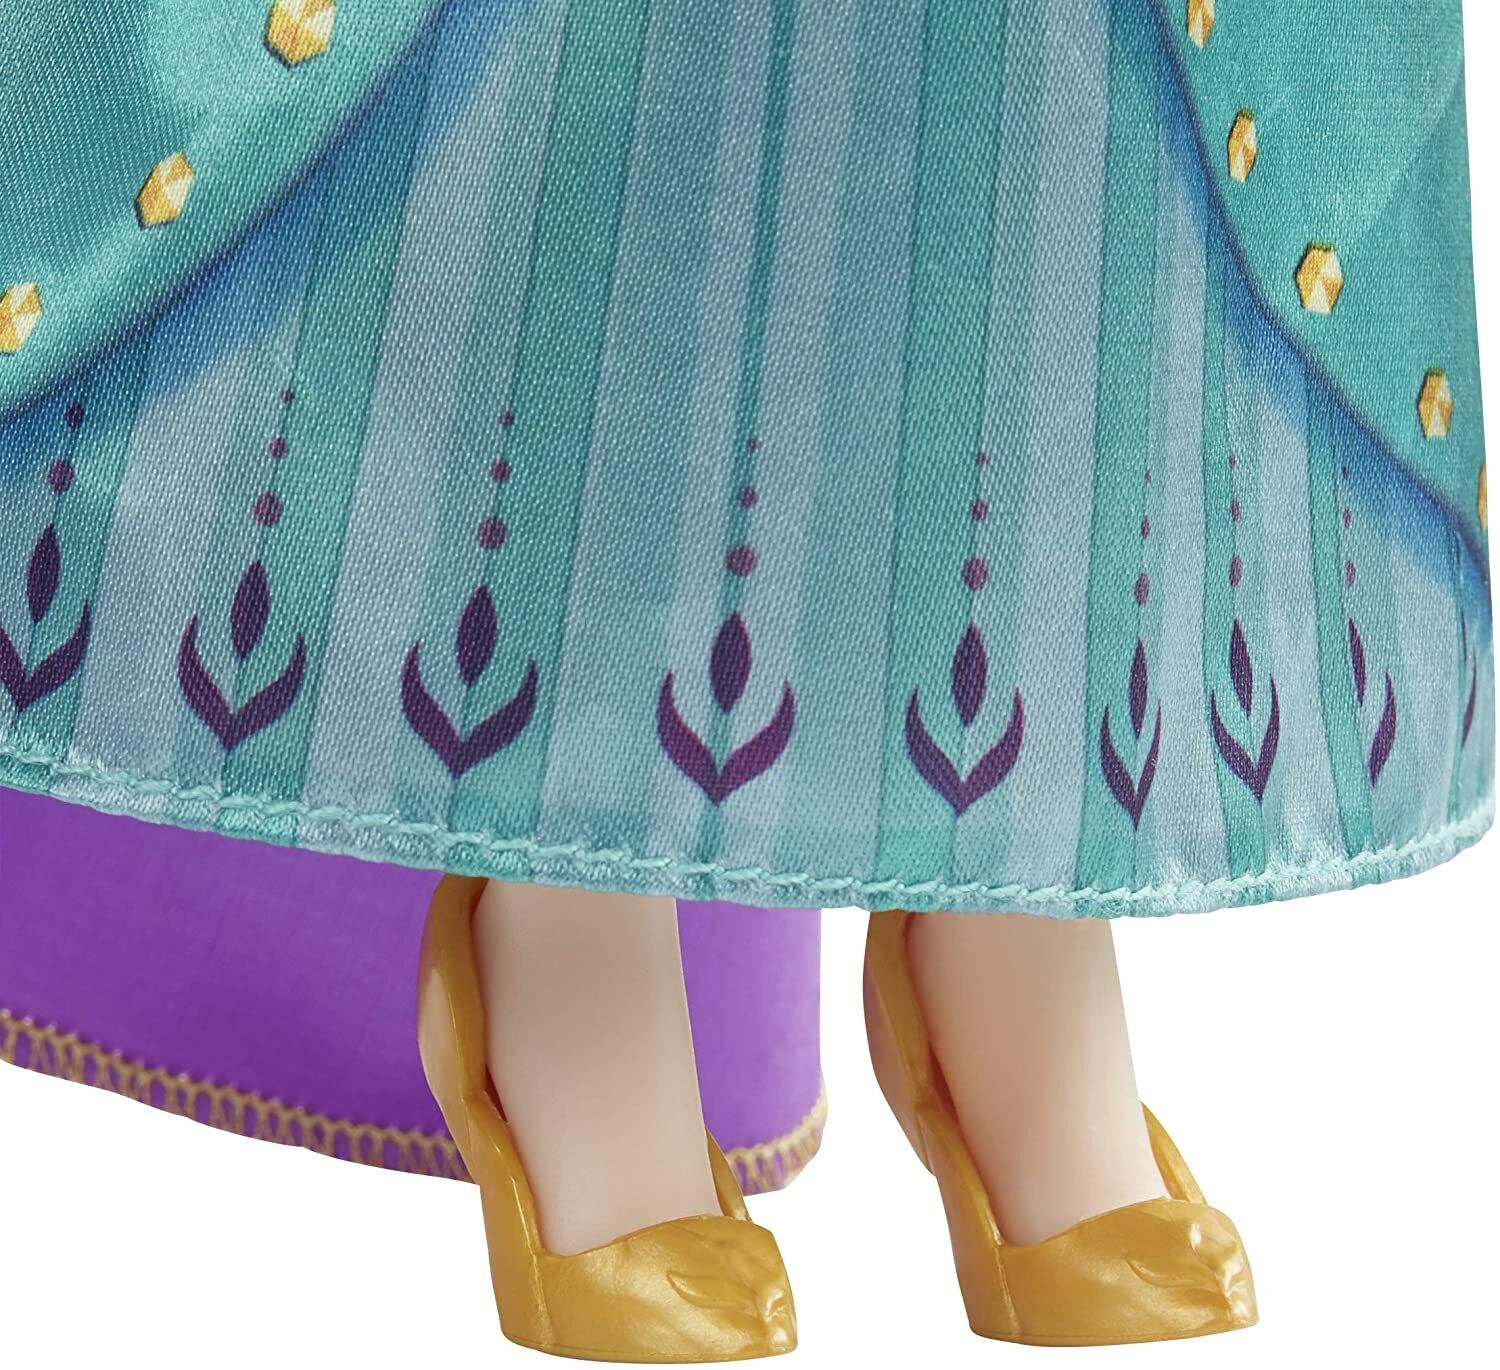 New Disney Frozen 2 Queen Anna Fashion Doll F1412 - Perfect Gift for Kids